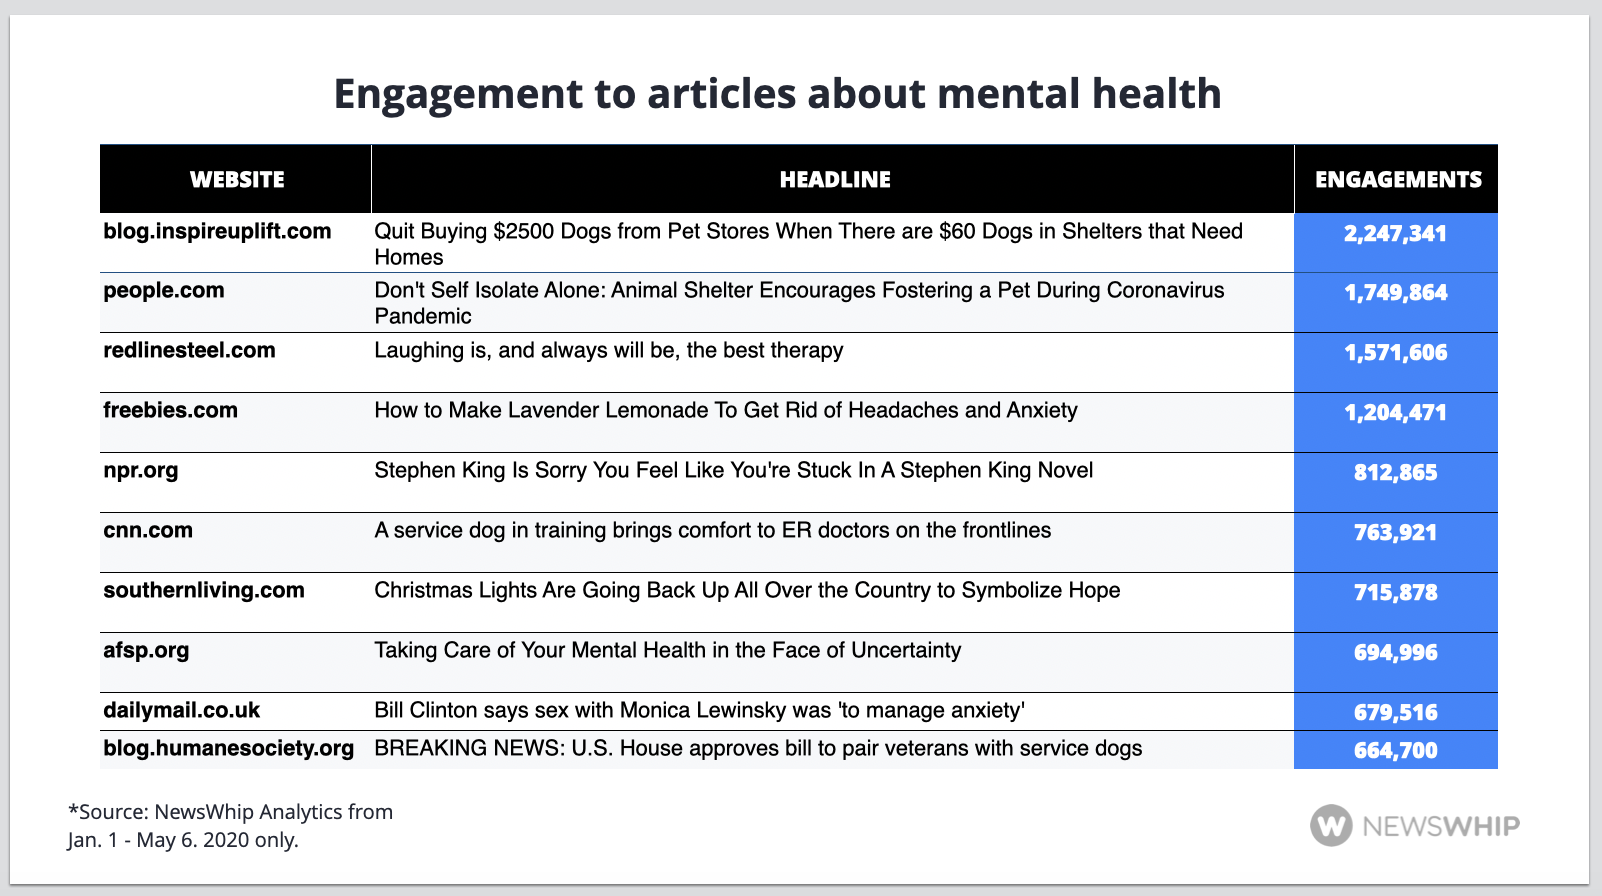 Chart showing the top articles about mental health in 2020, ranked by engagement